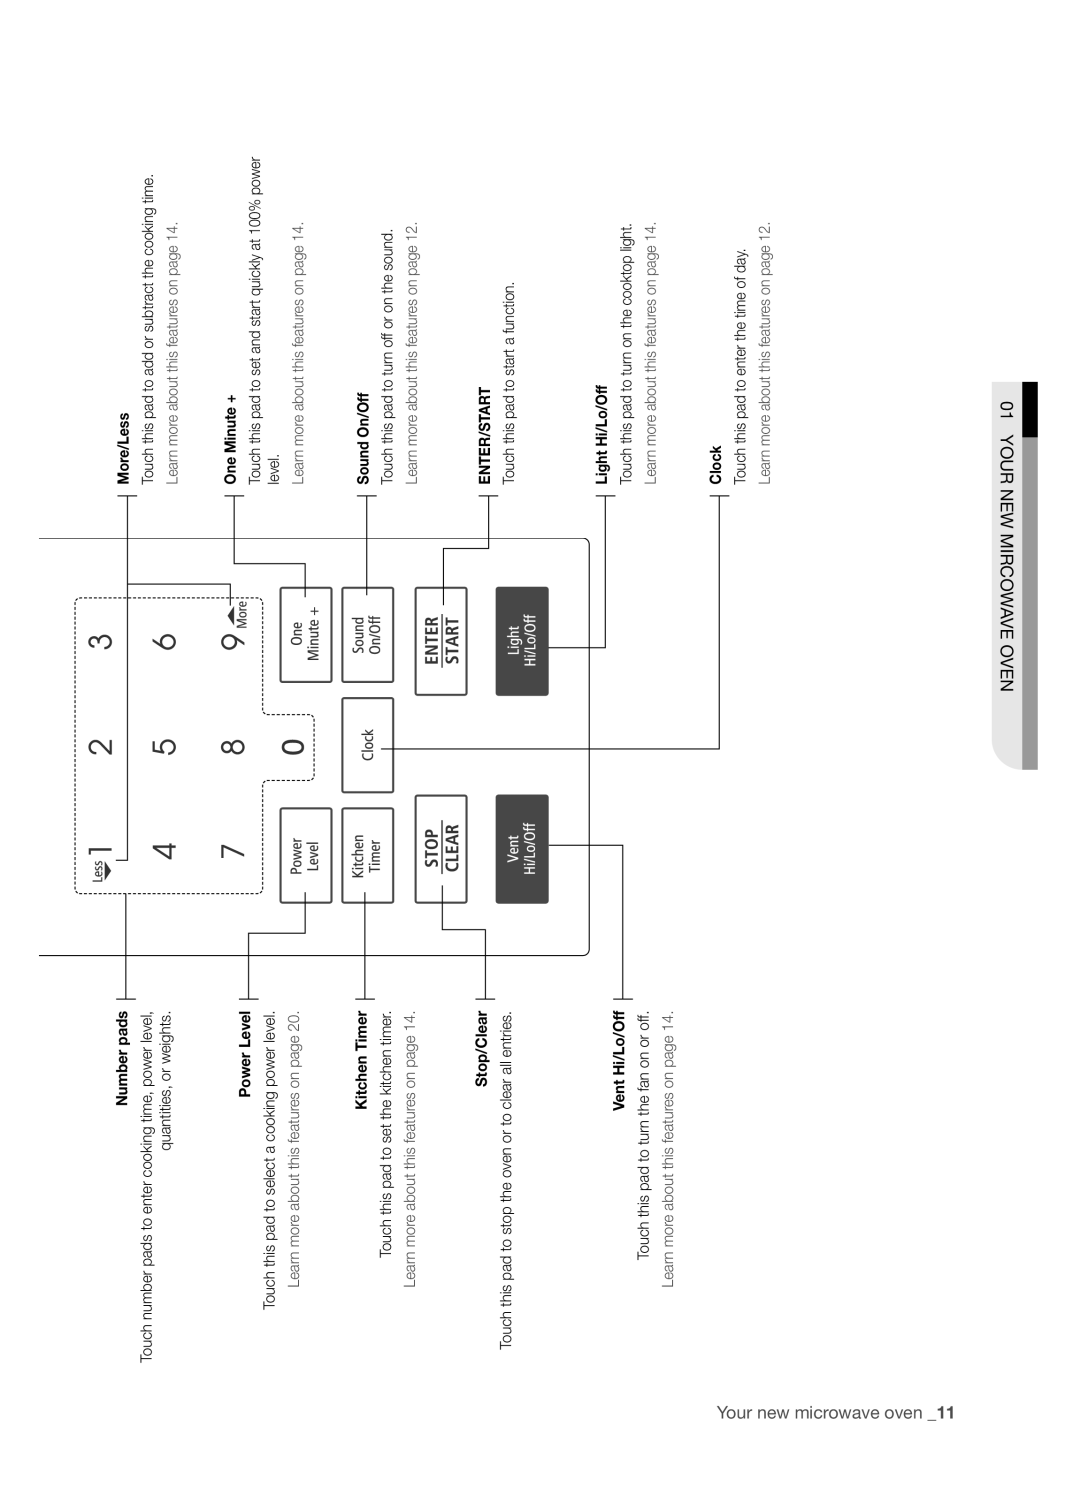 Samsung SMH5165 user manual Your new microwave oven, Learn more about this features on page 